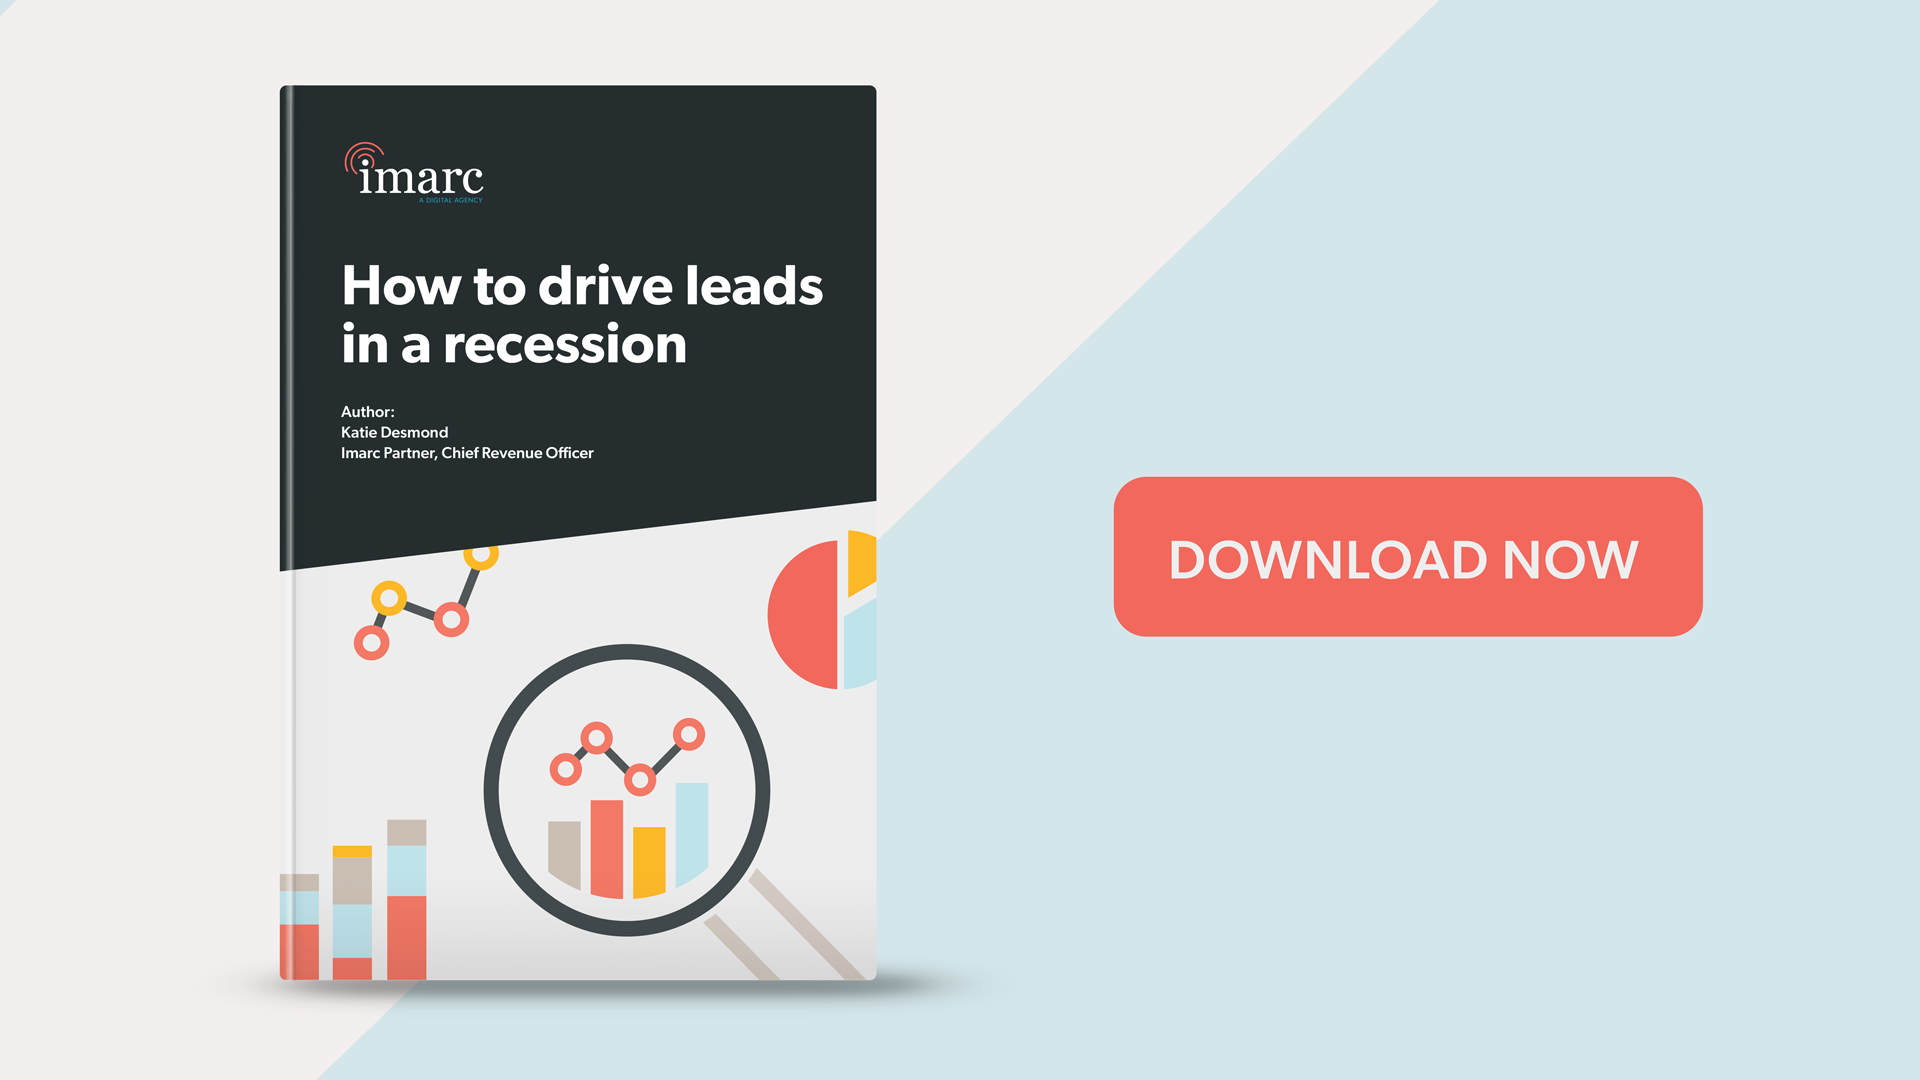 Ebook: How to drive leads in a recession